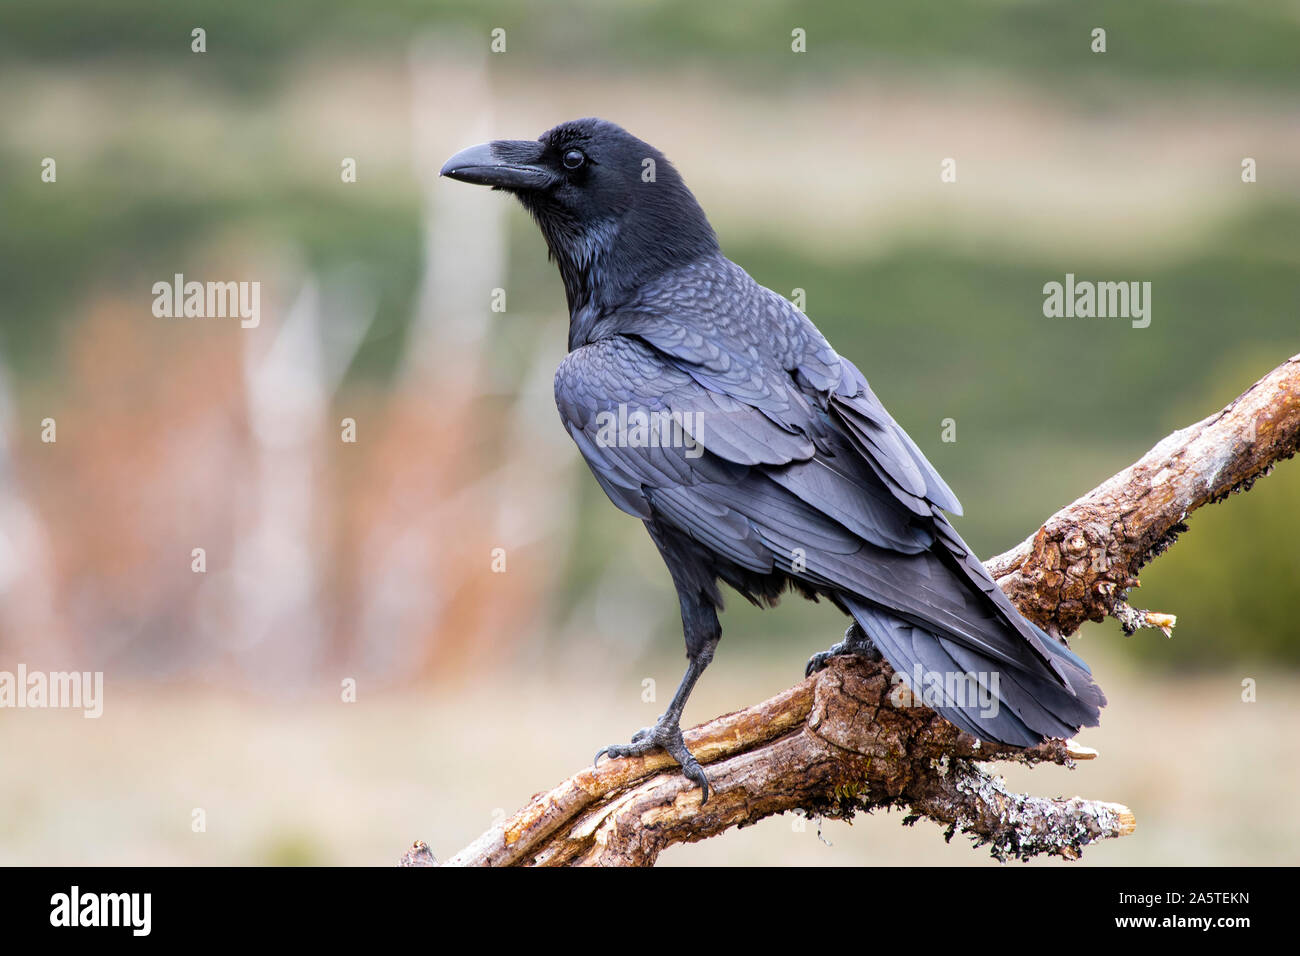 Common raven (Corvus corax), perched on a log. Wild animal life. Stock Photo